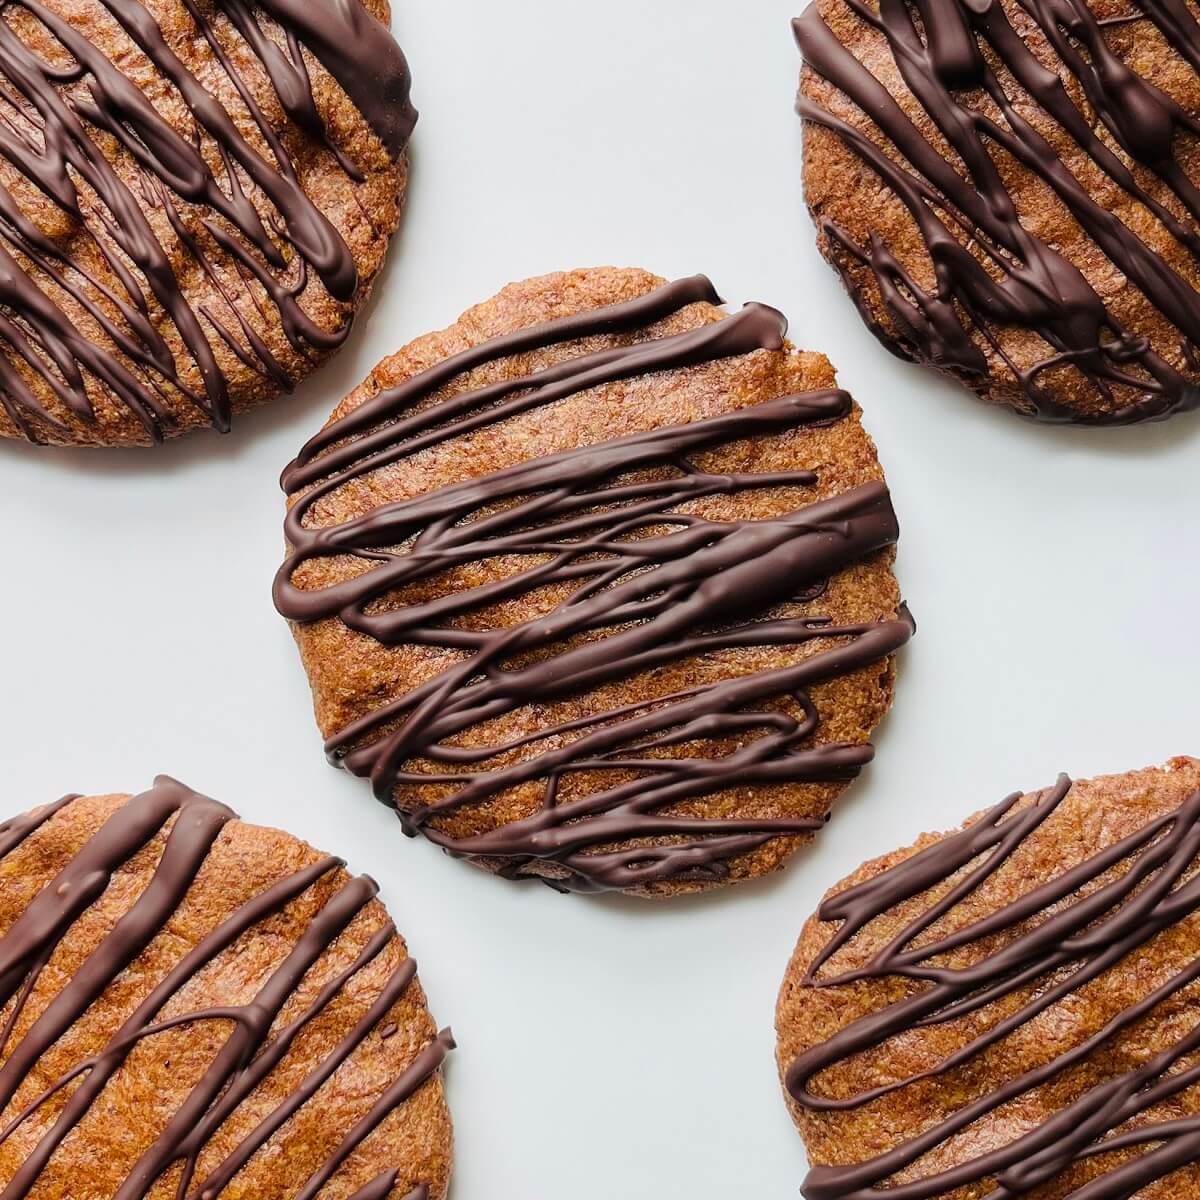 Cookies made with flaxseed on a white plate.